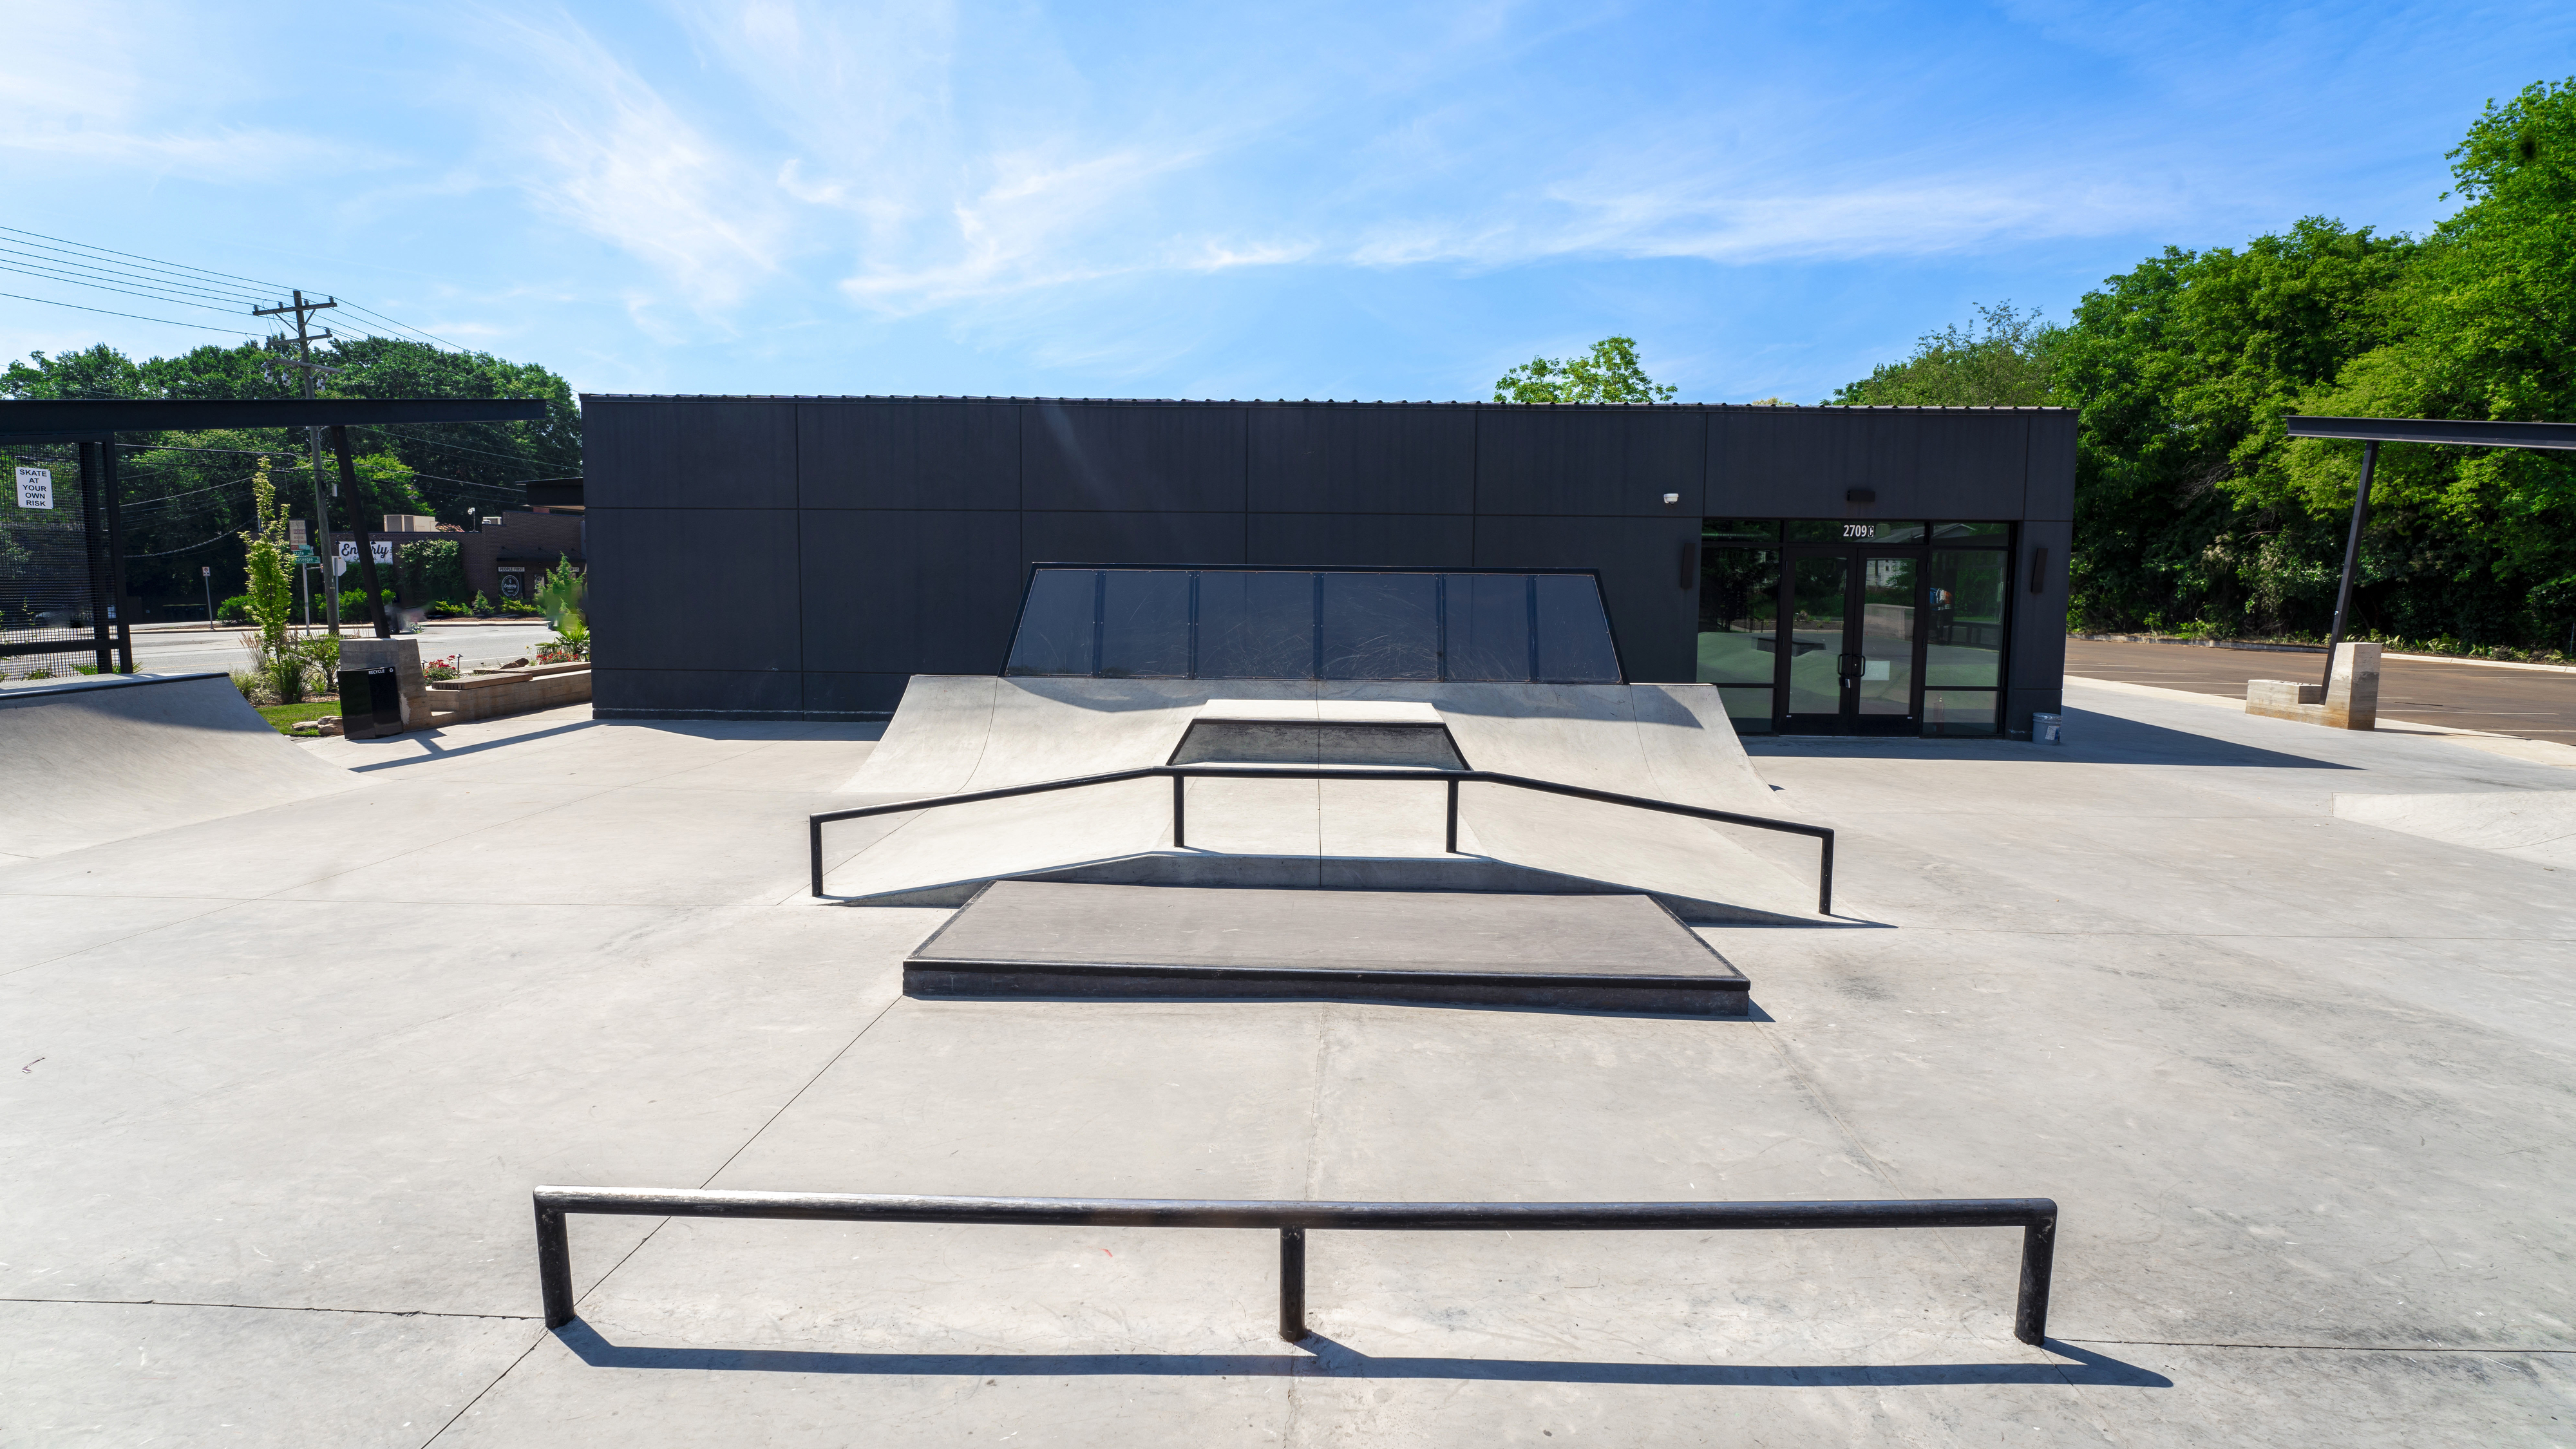 A modern skate park featuring various ramps and railings in an outdoor setting with a building in the background